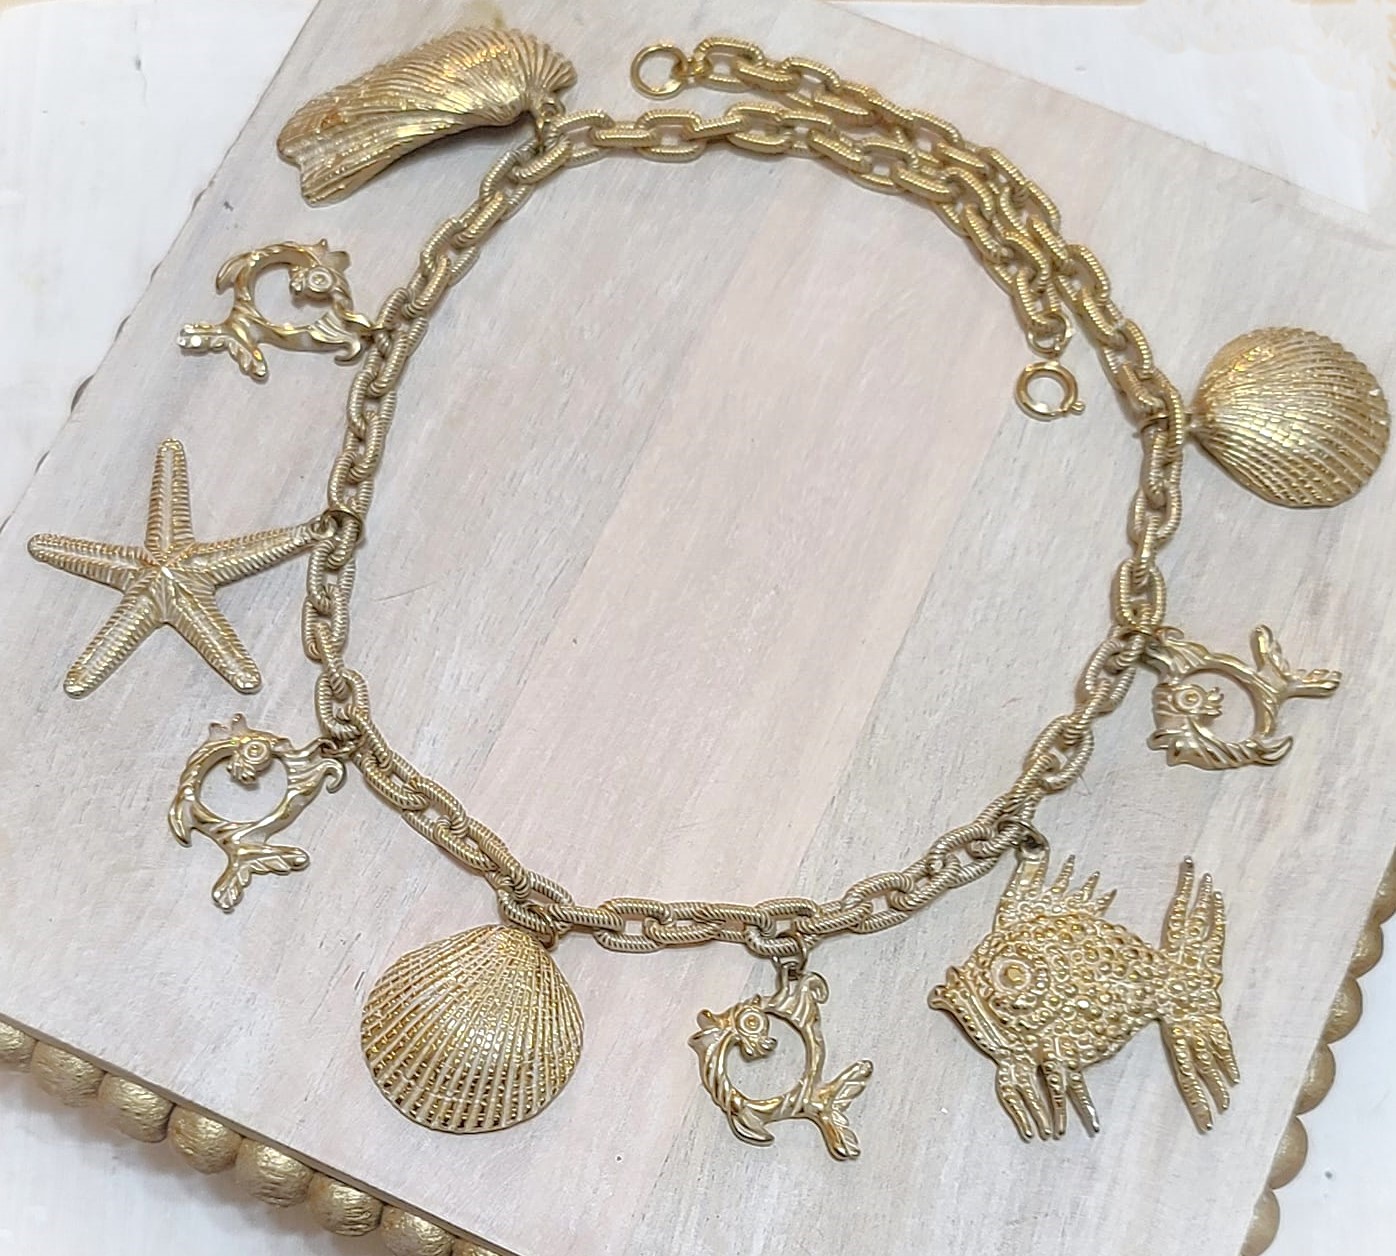 Seaside shells and fish charm vintage necklace